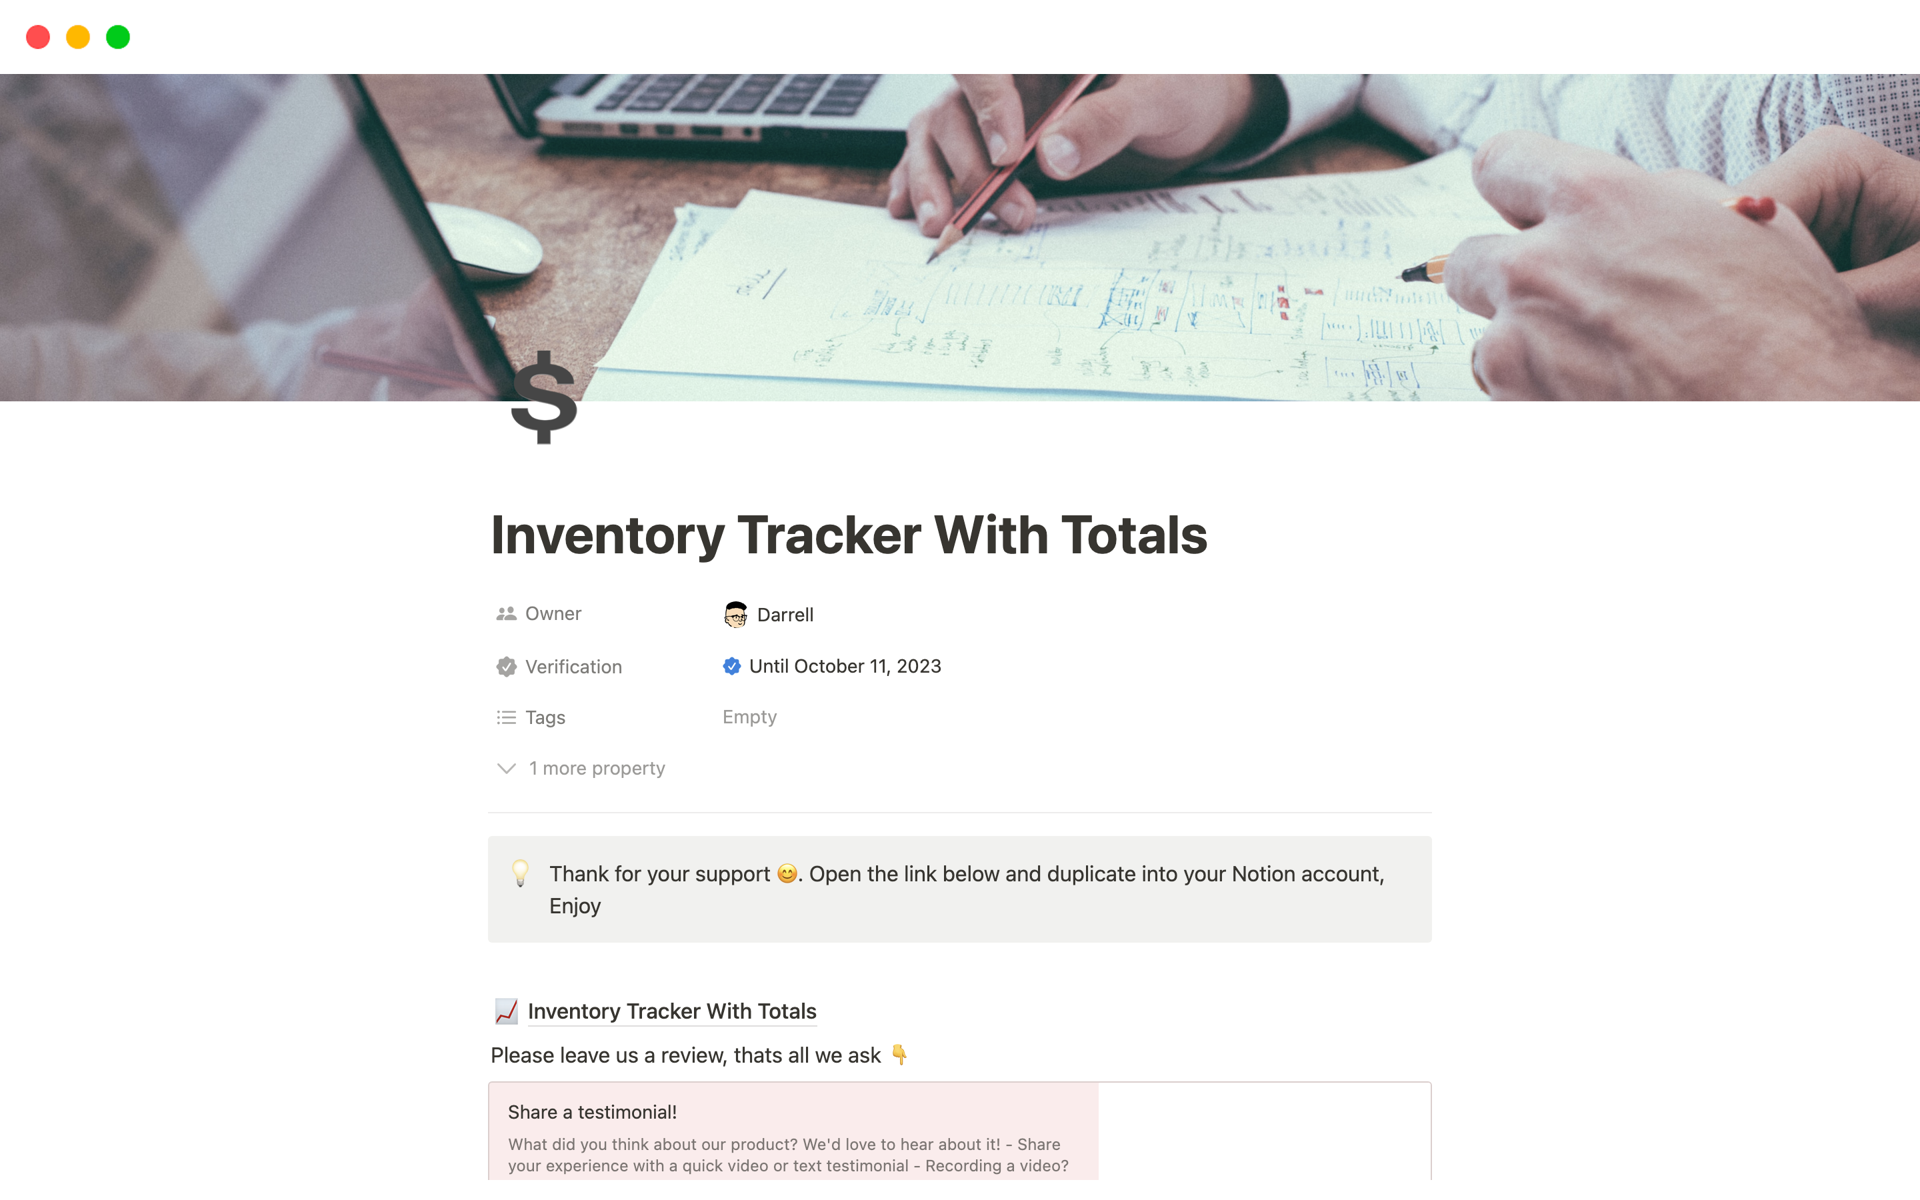 Inventory Tracker With Totalsのテンプレートのプレビュー